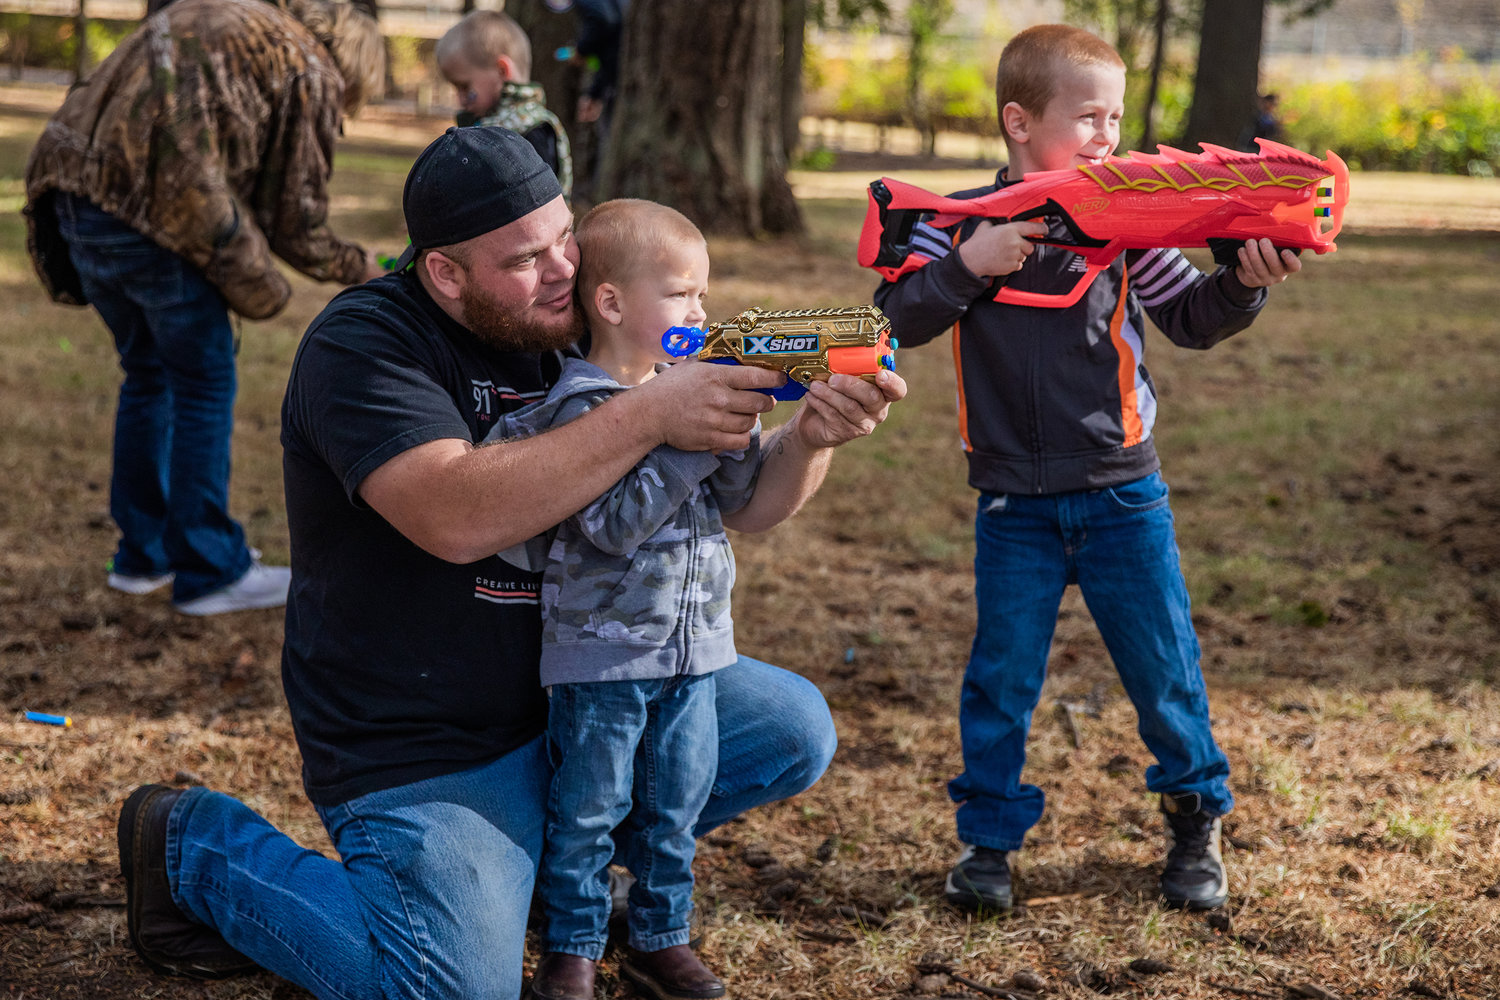 Andy Sickles helps as Luke, 2, aims his six-shooter alongside his brother Abram, 6, during a Nerf War Sunday afternoon at Borst Park in Centralia.